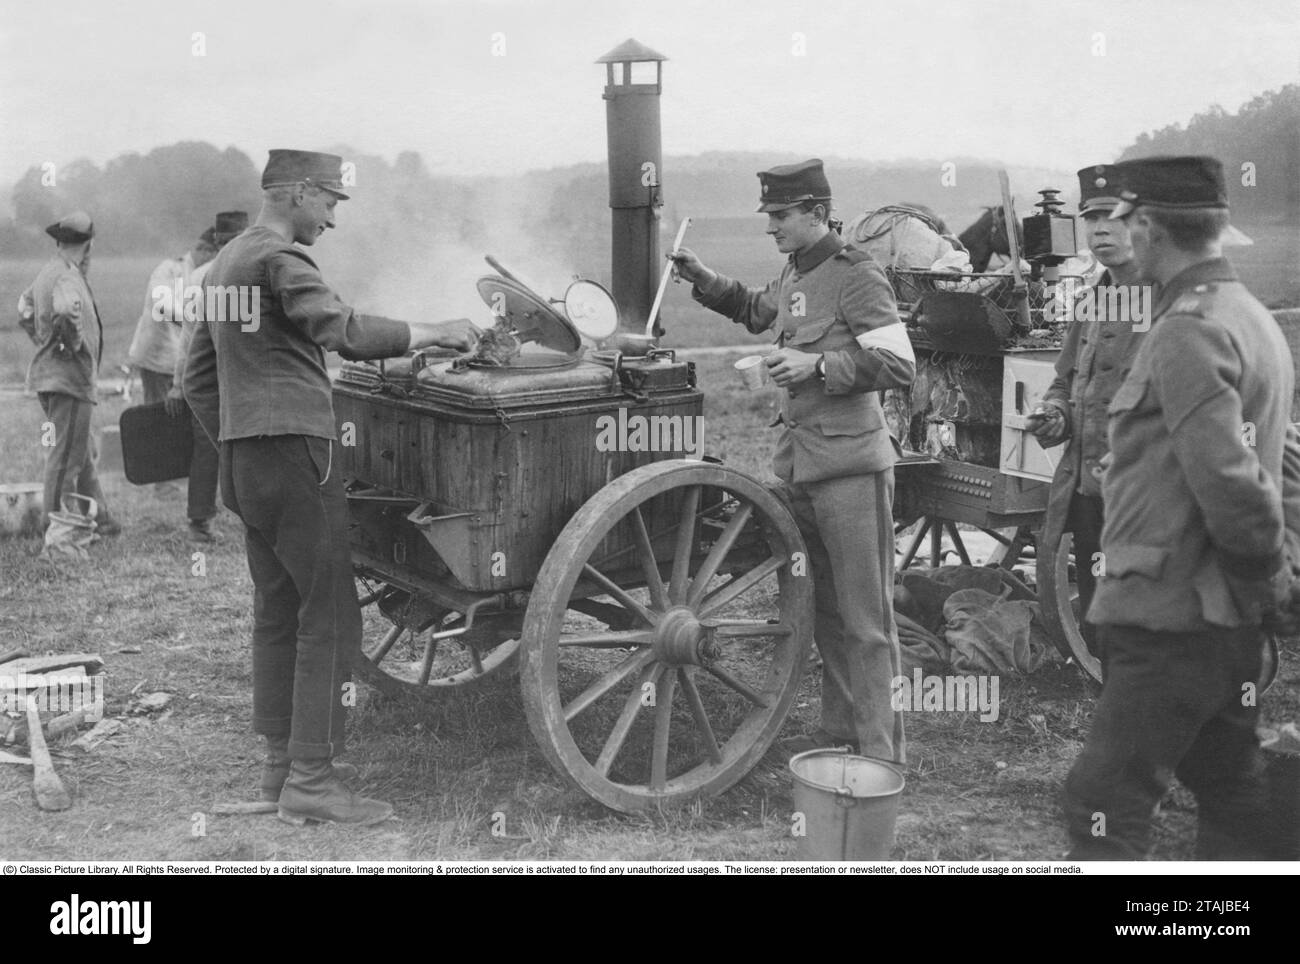 During the time of World War 1.  Swedish soldiers somewhere in Sweden at a field kitchen, cooking for the soldiers. 1917 Stock Photo